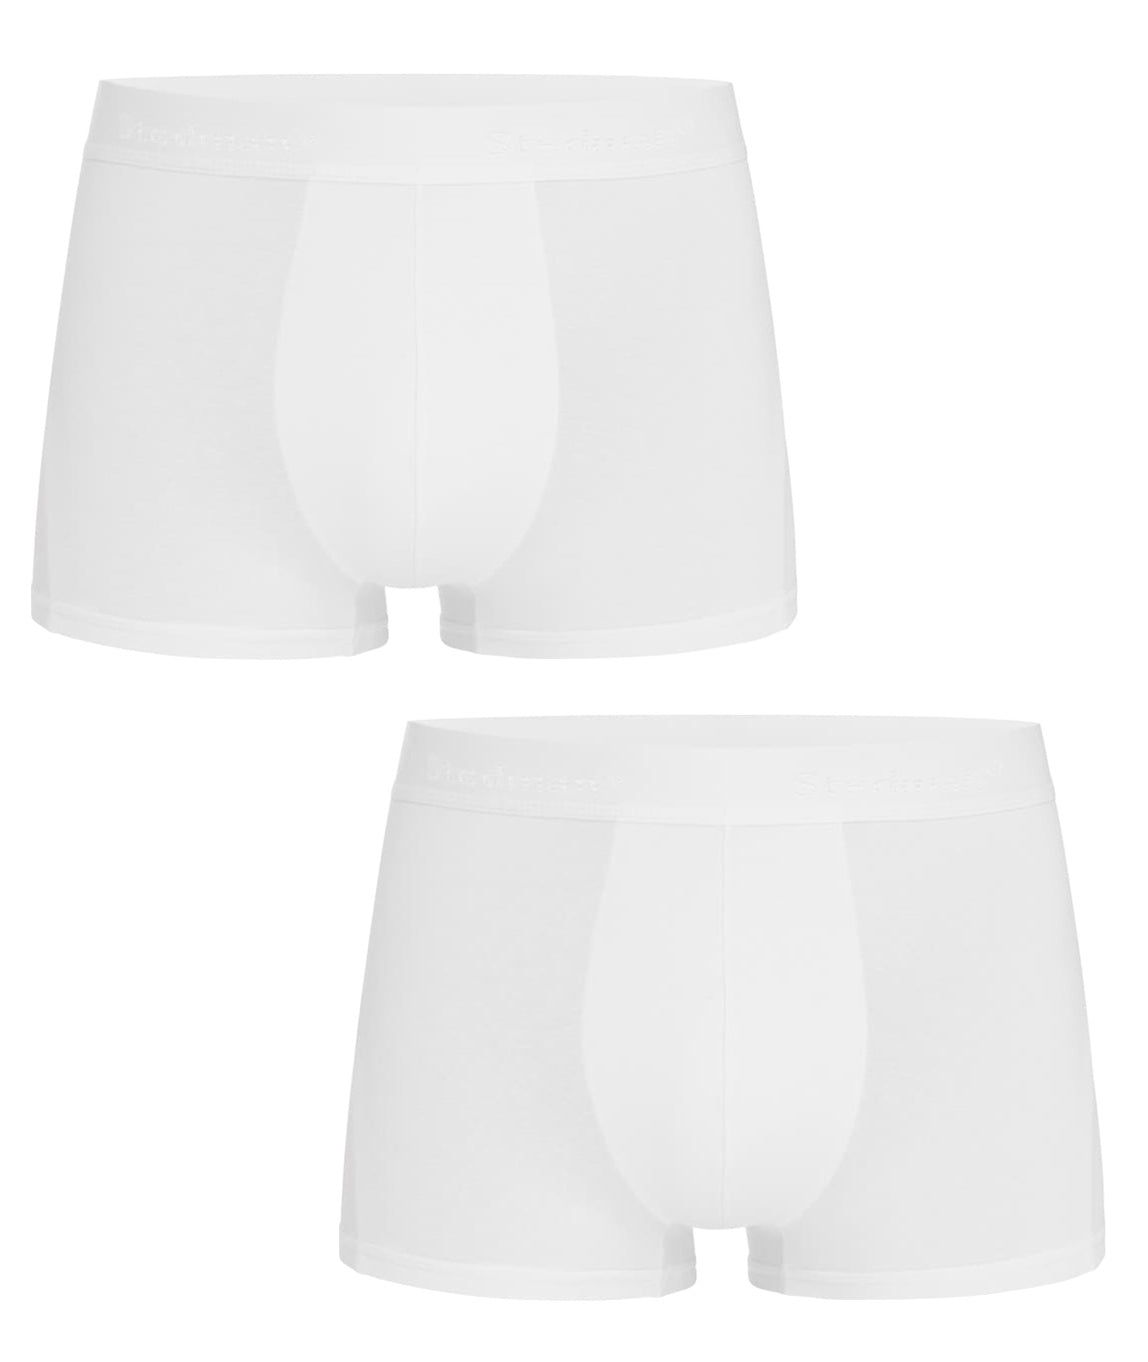 Stedman Boxers [Twin pack]